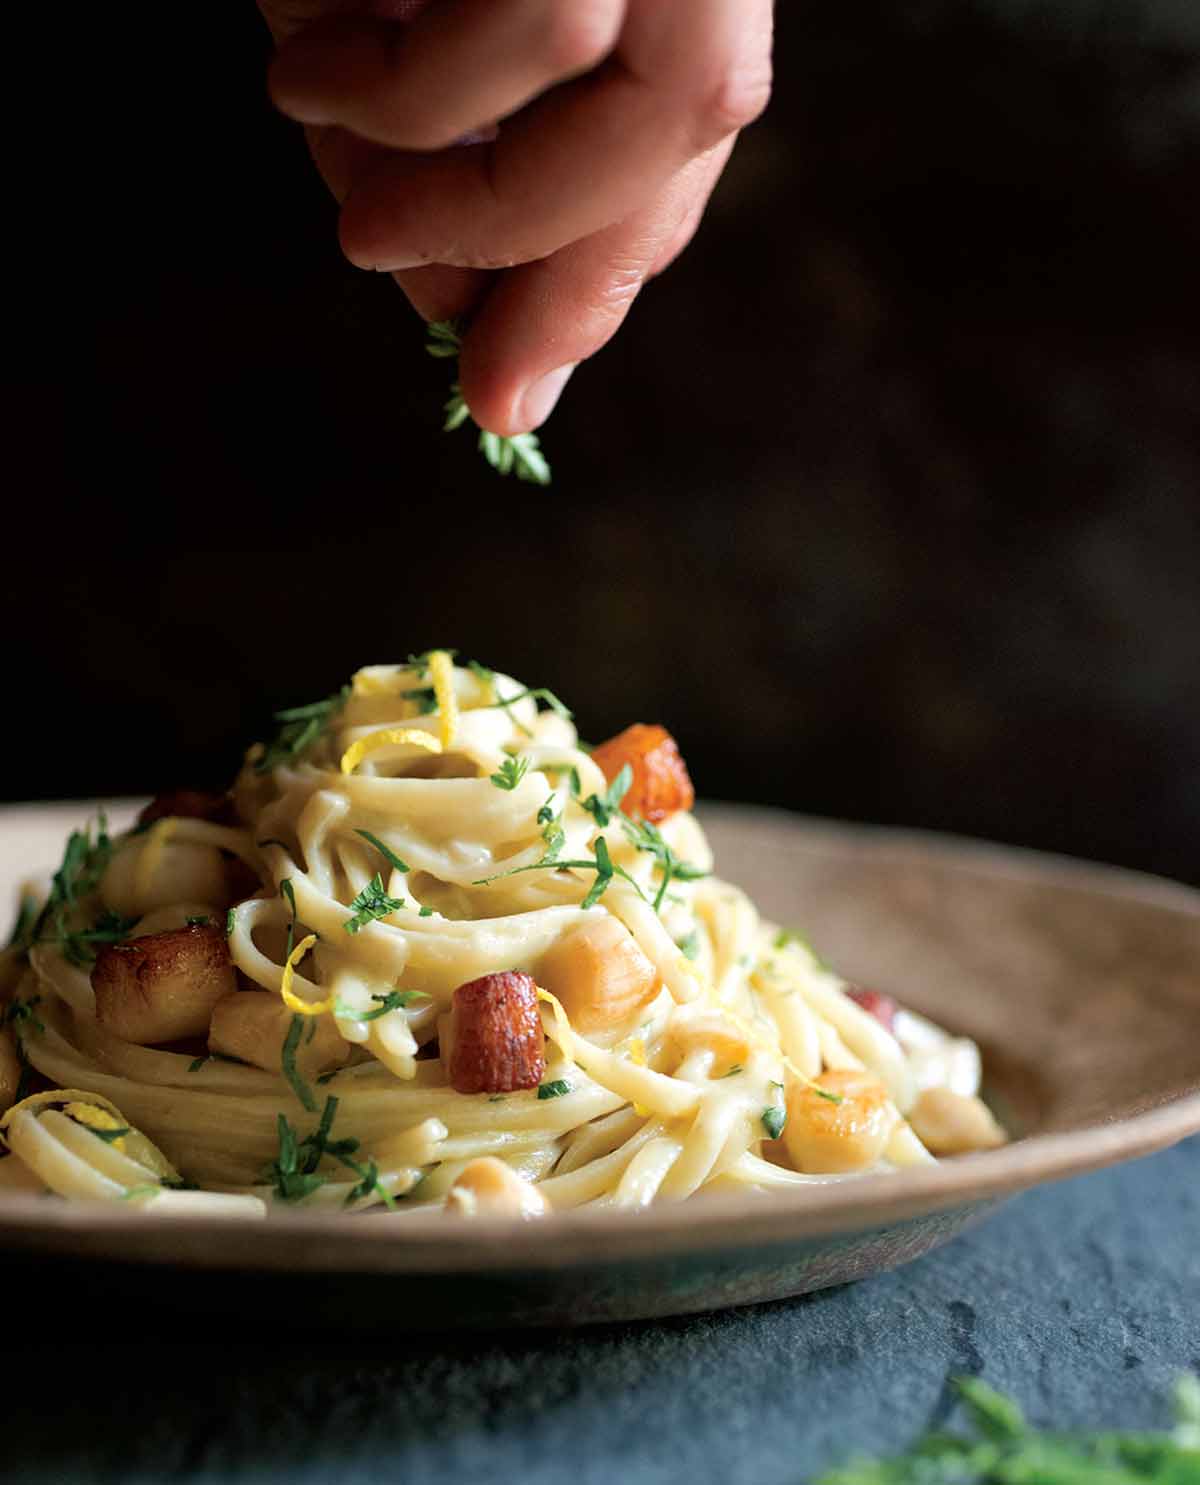 A tangle of fettuccine with scallops finished with lemon zest and chervil on a brown plate.